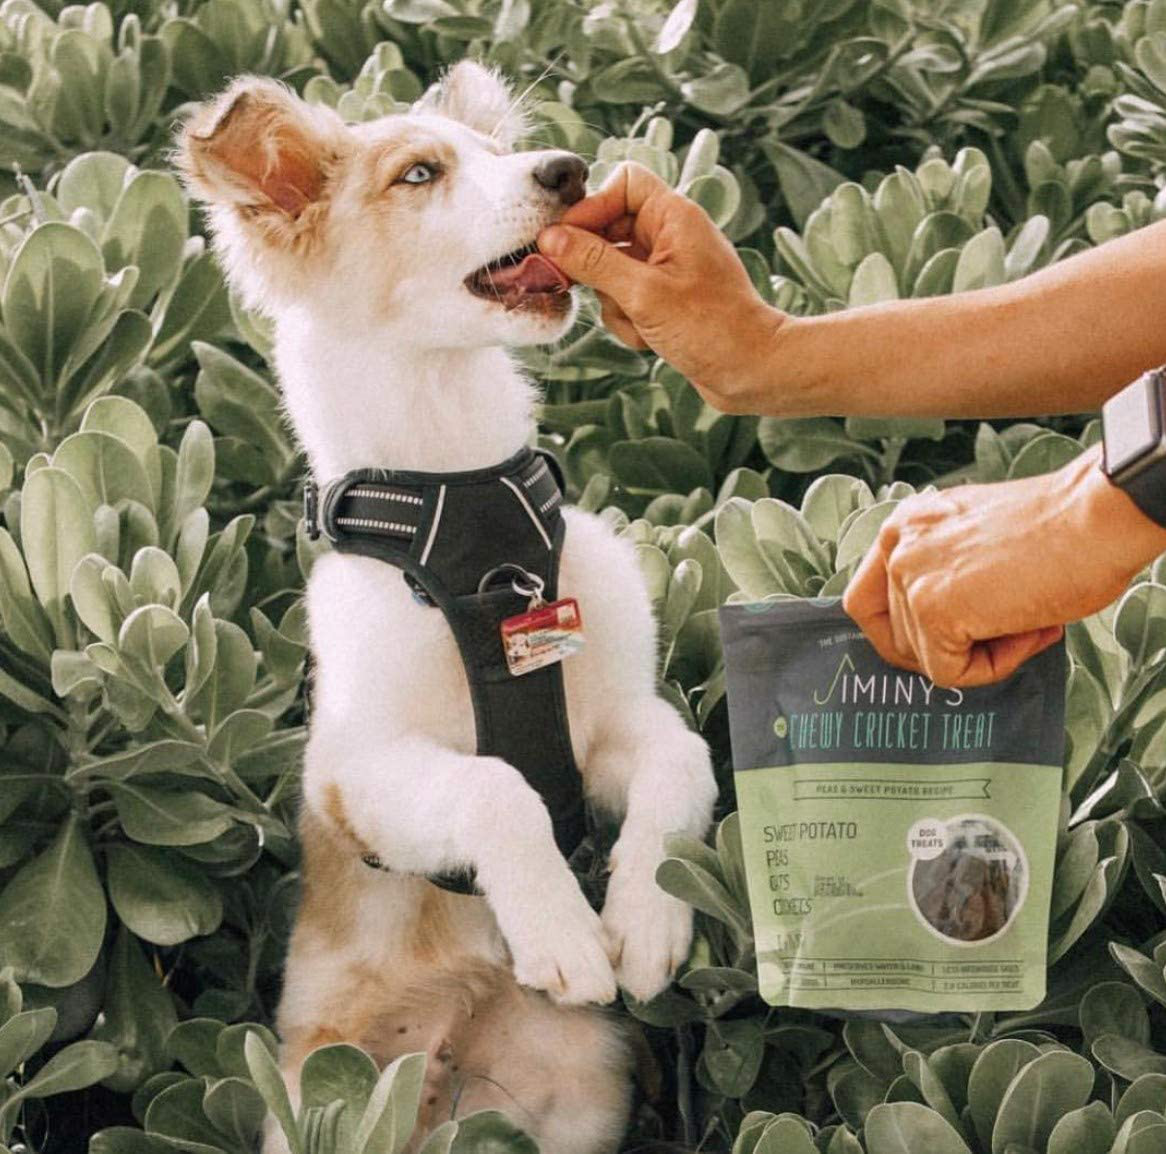 Jiminy'S Cricket Protein Sweet Potato and Pea Soft & Chewy Dog Training Treats | 100% Made in the USA | Gluten-Free | Sustainable | Limited Ingredients | High Protein | Hypoallergenic Animals & Pet Supplies > Pet Supplies > Dog Supplies > Dog Treats Jiminy's   